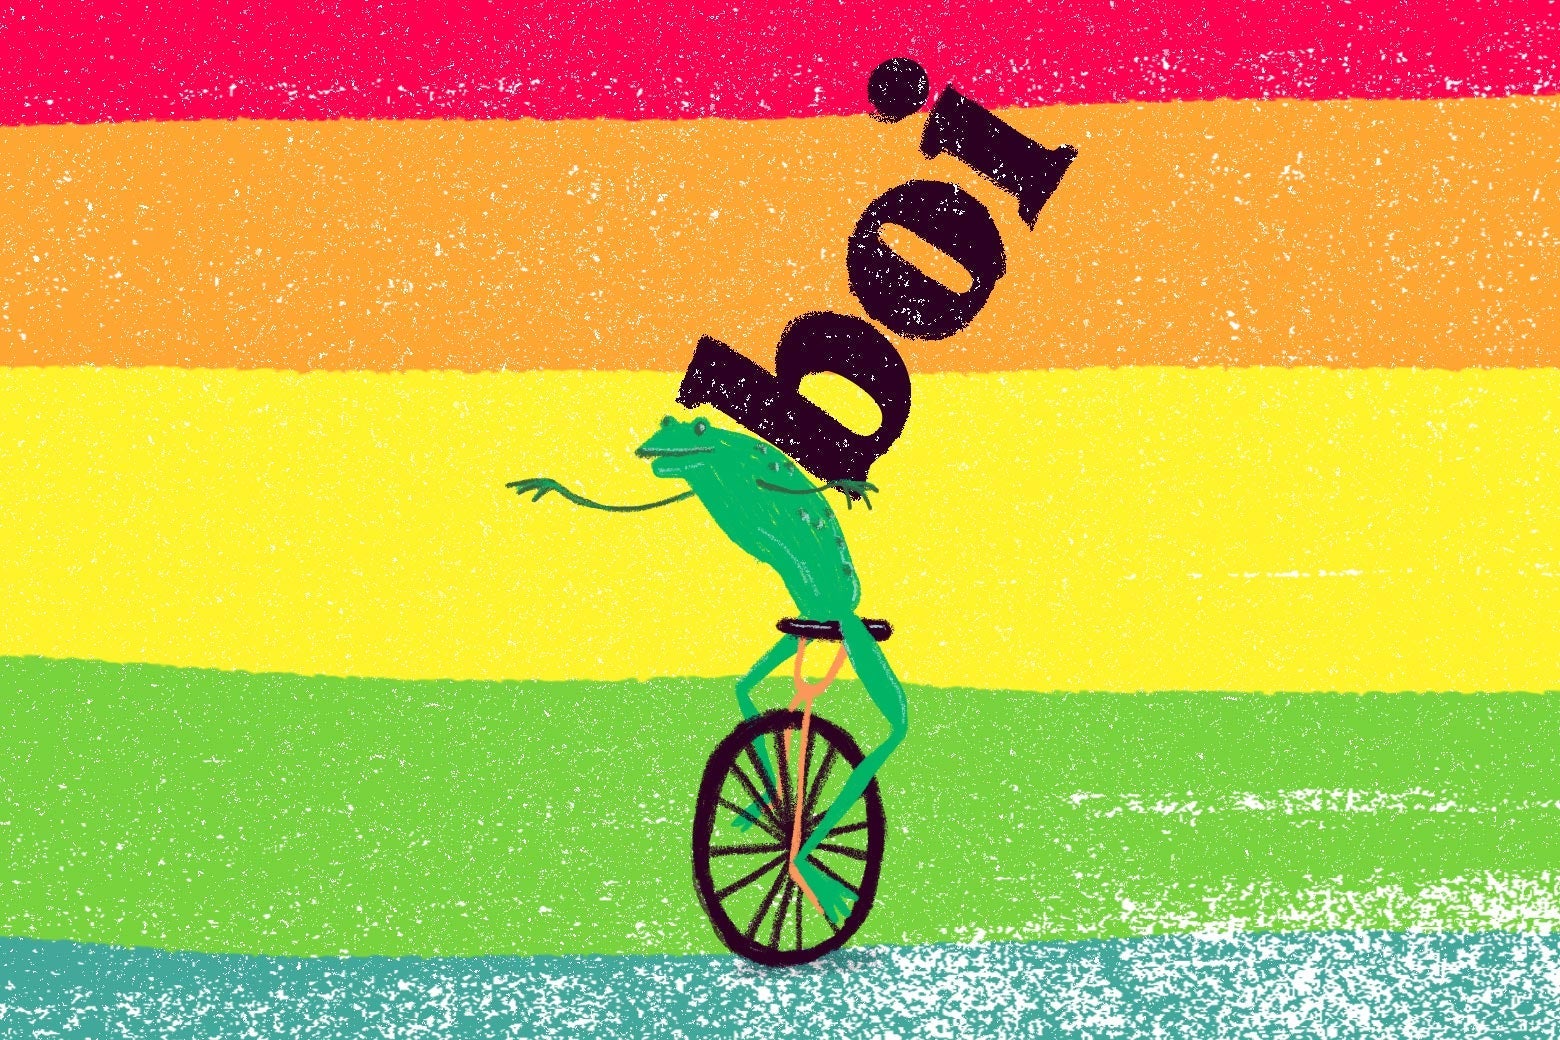 The word boi on the back of the unicycle-riding frog from the Dat Boi meme, on a rainbow background